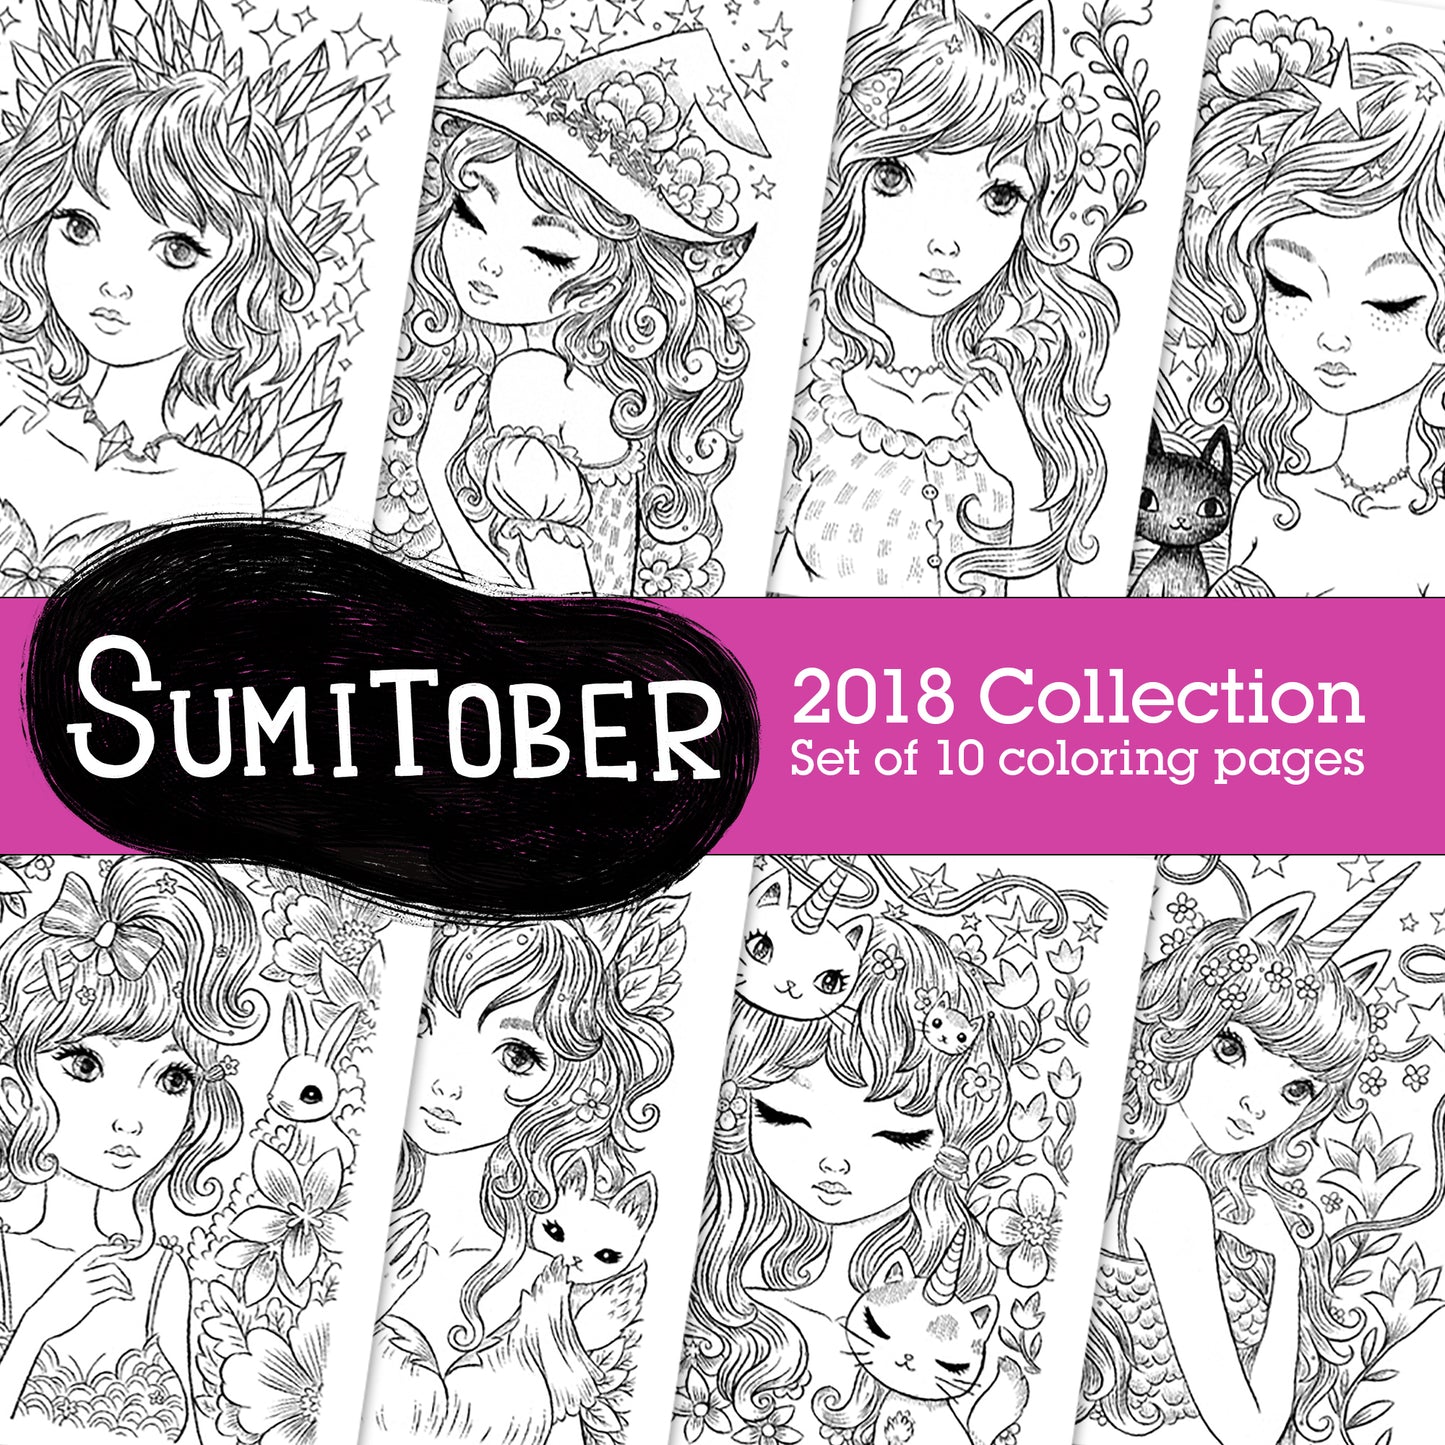 Sumitober 2018 Coloring Collection | Jeremiah Ketner | Instant Download pdf